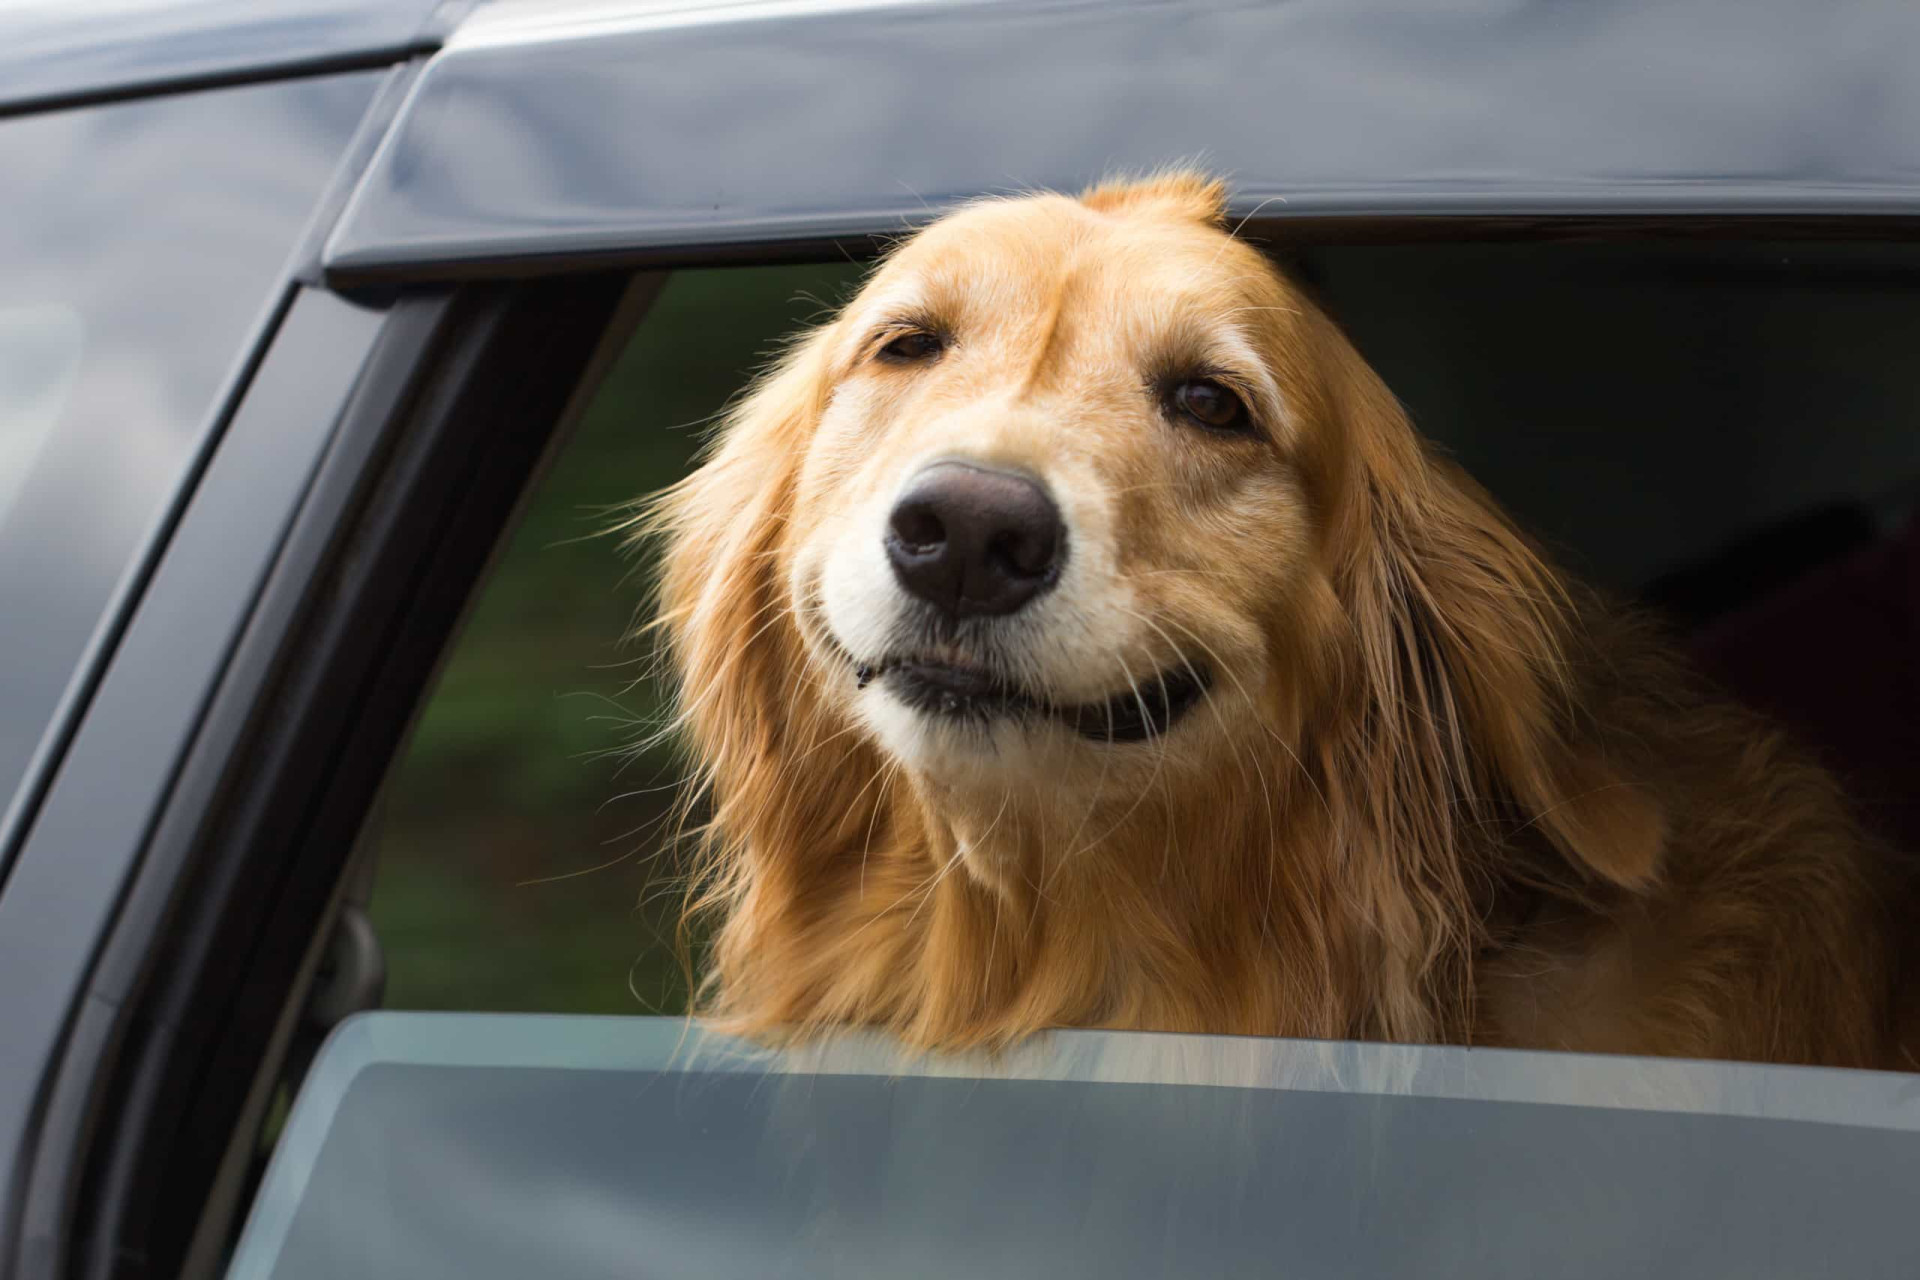 <p>Yes, dogs love it, and, yes, they look adorable when they do it, but this is actually quite dangerous for them on the road.</p><p>You may also like:<a href="https://www.starsinsider.com/n/477854?utm_source=msn.com&utm_medium=display&utm_campaign=referral_description&utm_content=719768en-us"> Famous people who had to flee their home countries</a></p>